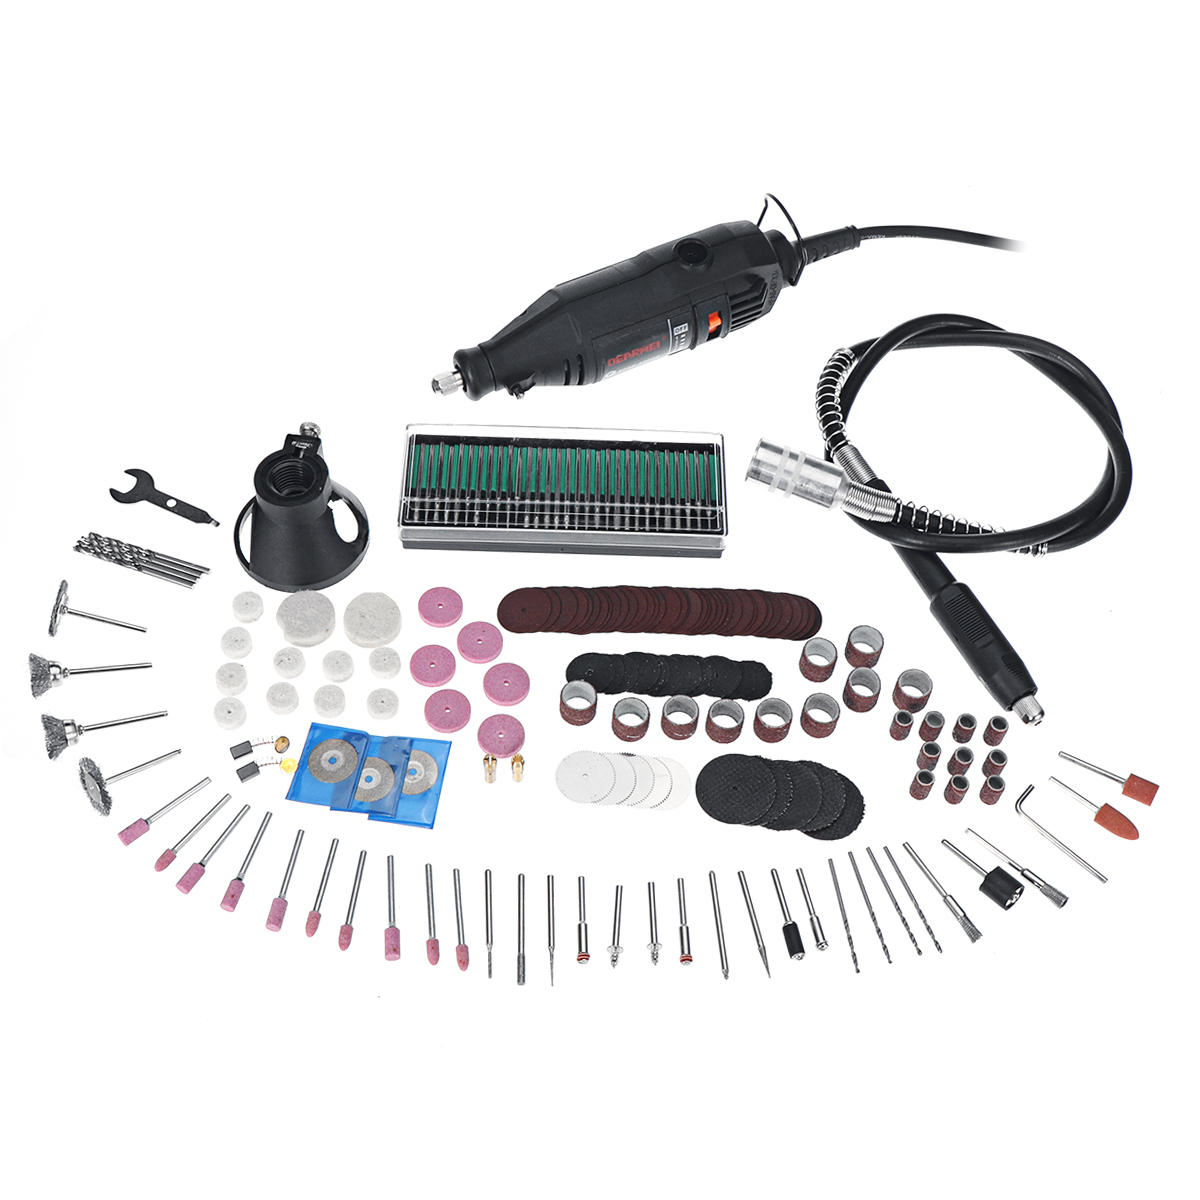 180PCS Professional Mini Electric Drill Grinder Kit 5 Speed Rotary Engraver Tools Set For Engraving Drilling Cleaning Po